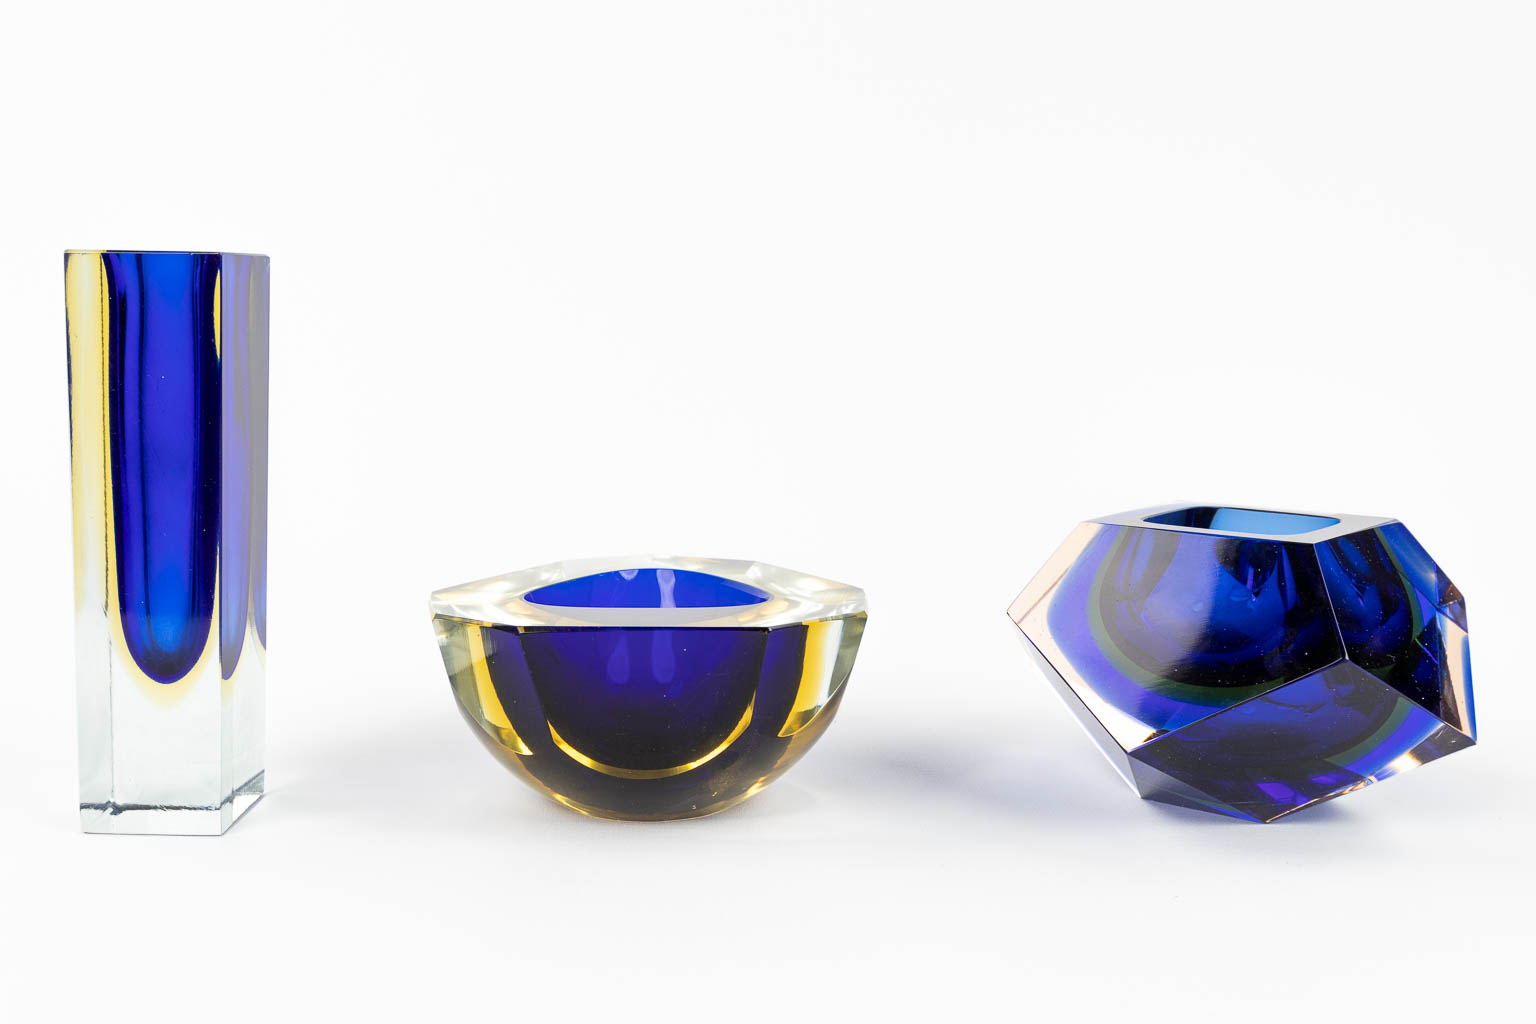 A collection of 3 'Somerso' glass items, made in Murano, Italy. (L:3,7 x W:3,7 x H:15 cm) - Image 10 of 13